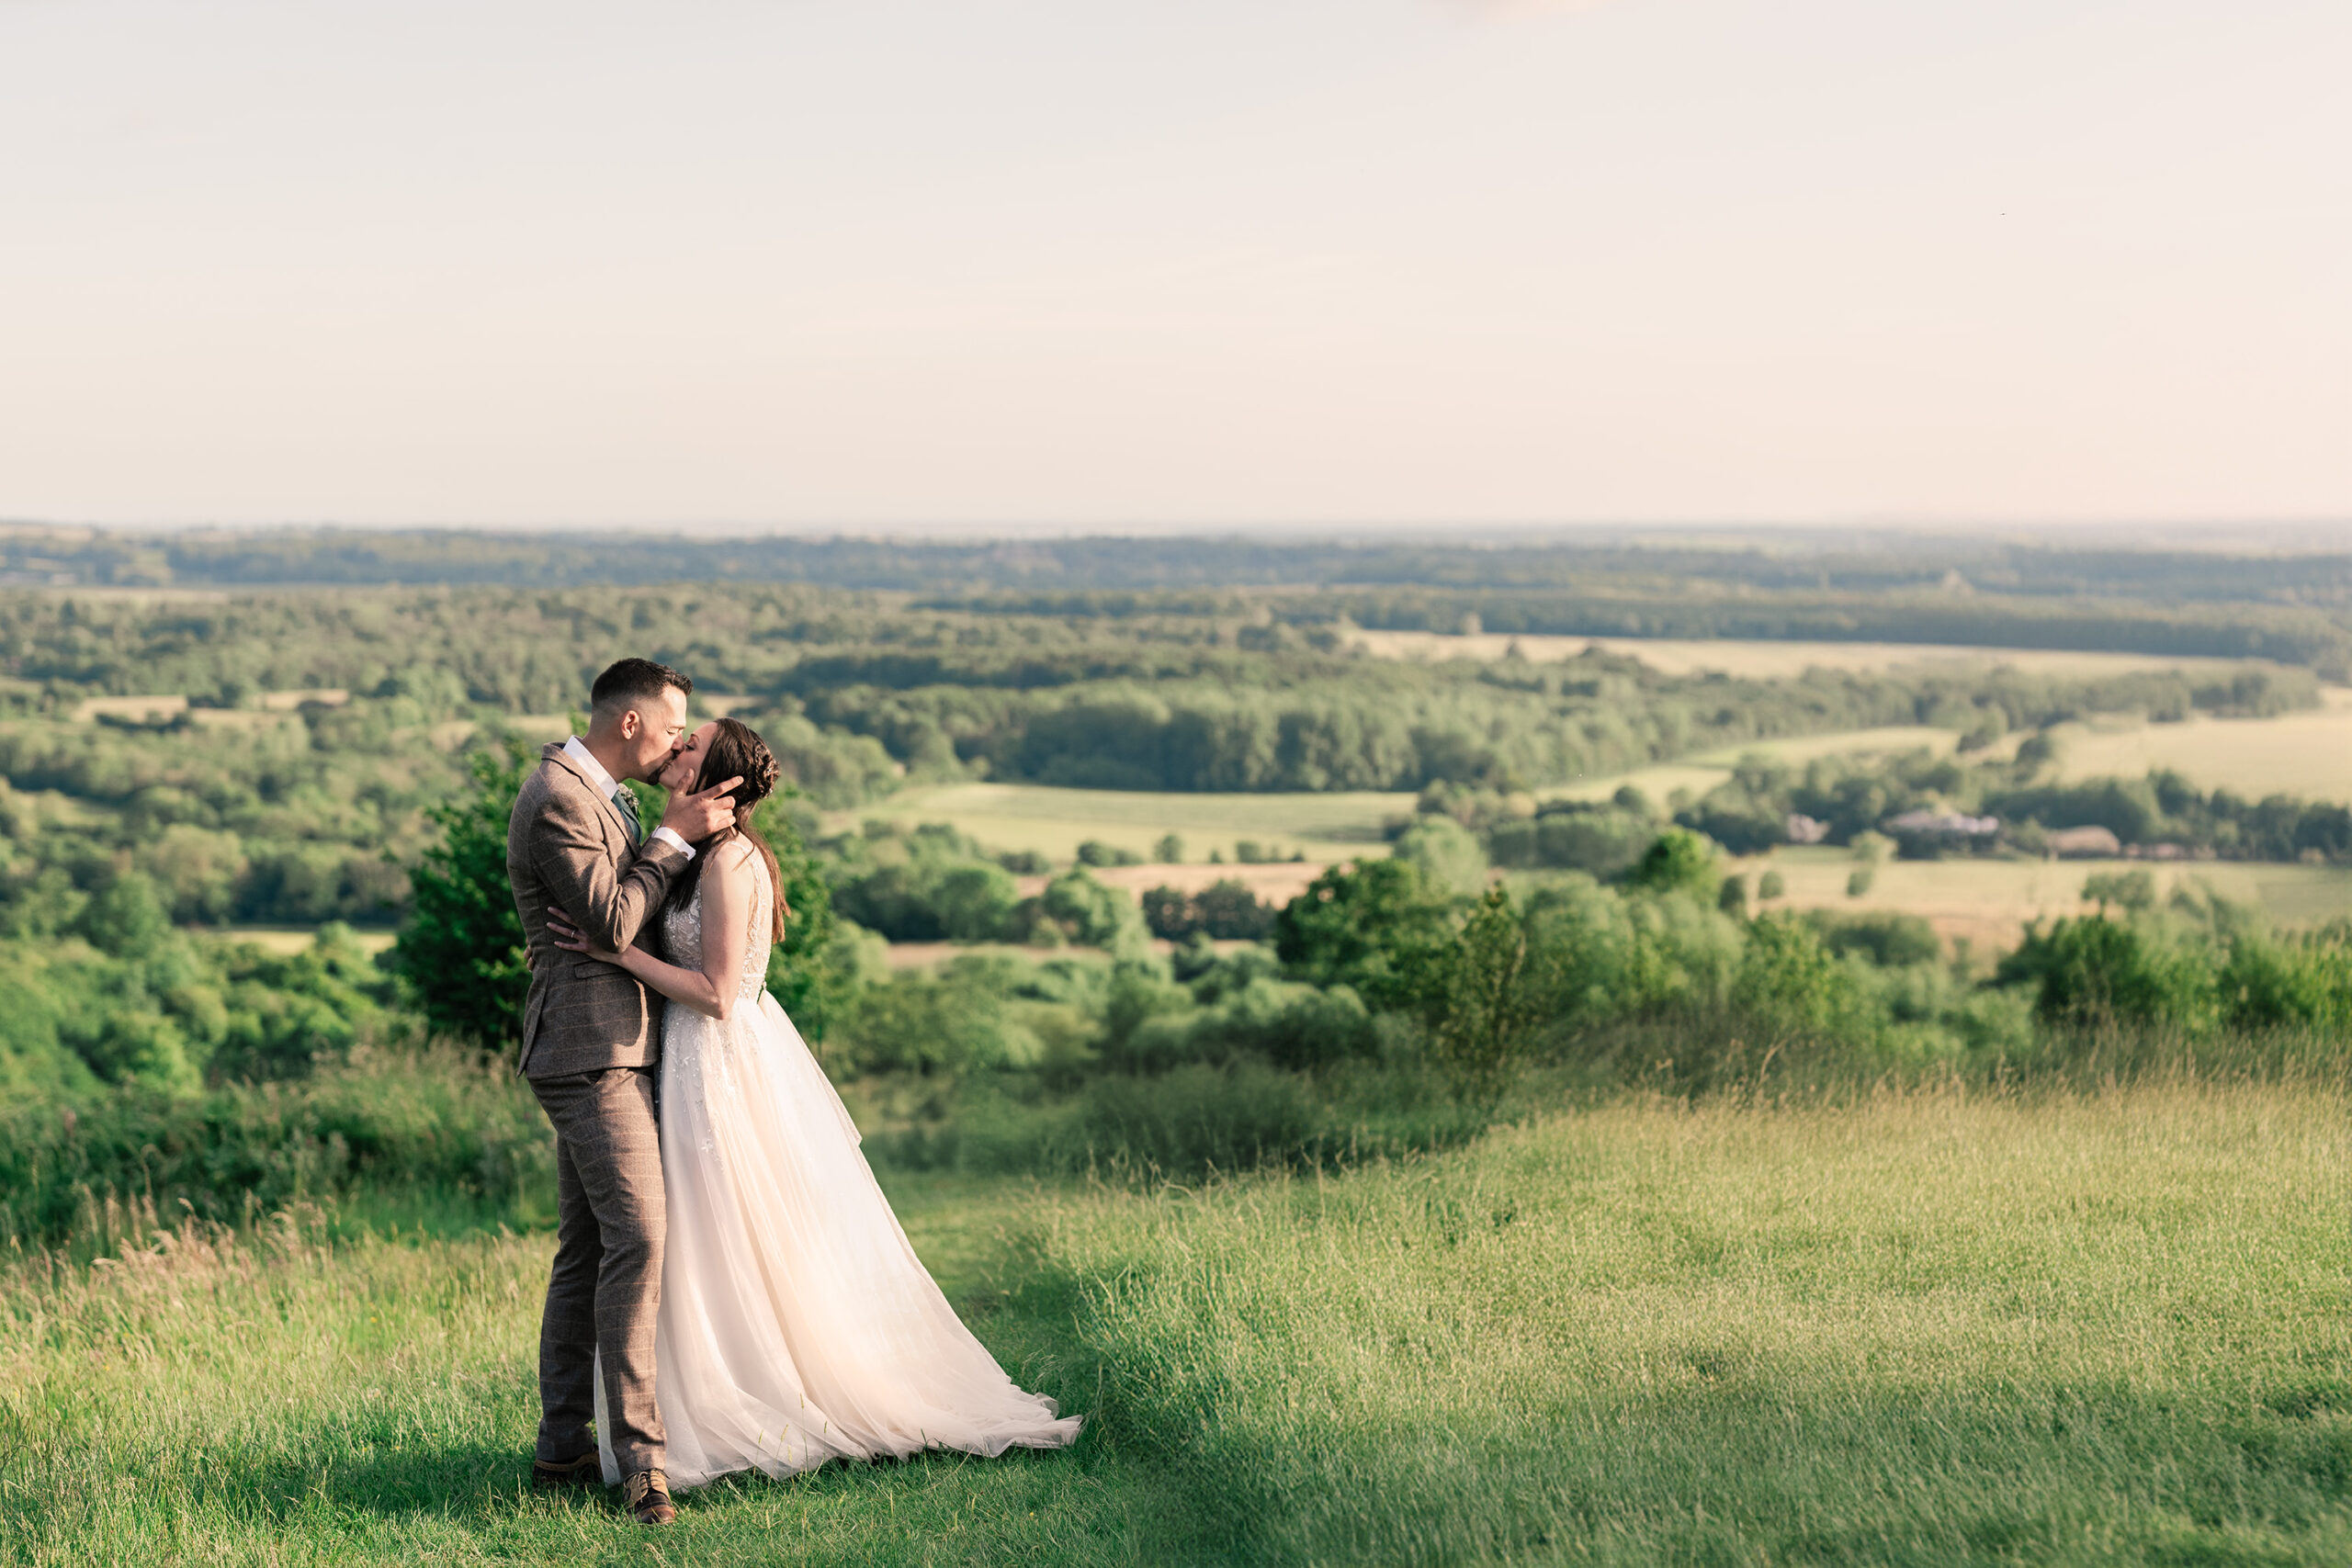 A bride in a white gown and groom in a light-colored suit share a kiss on a grassy hill, overlooking a scenic landscape of green fields and forests under a clear sky.